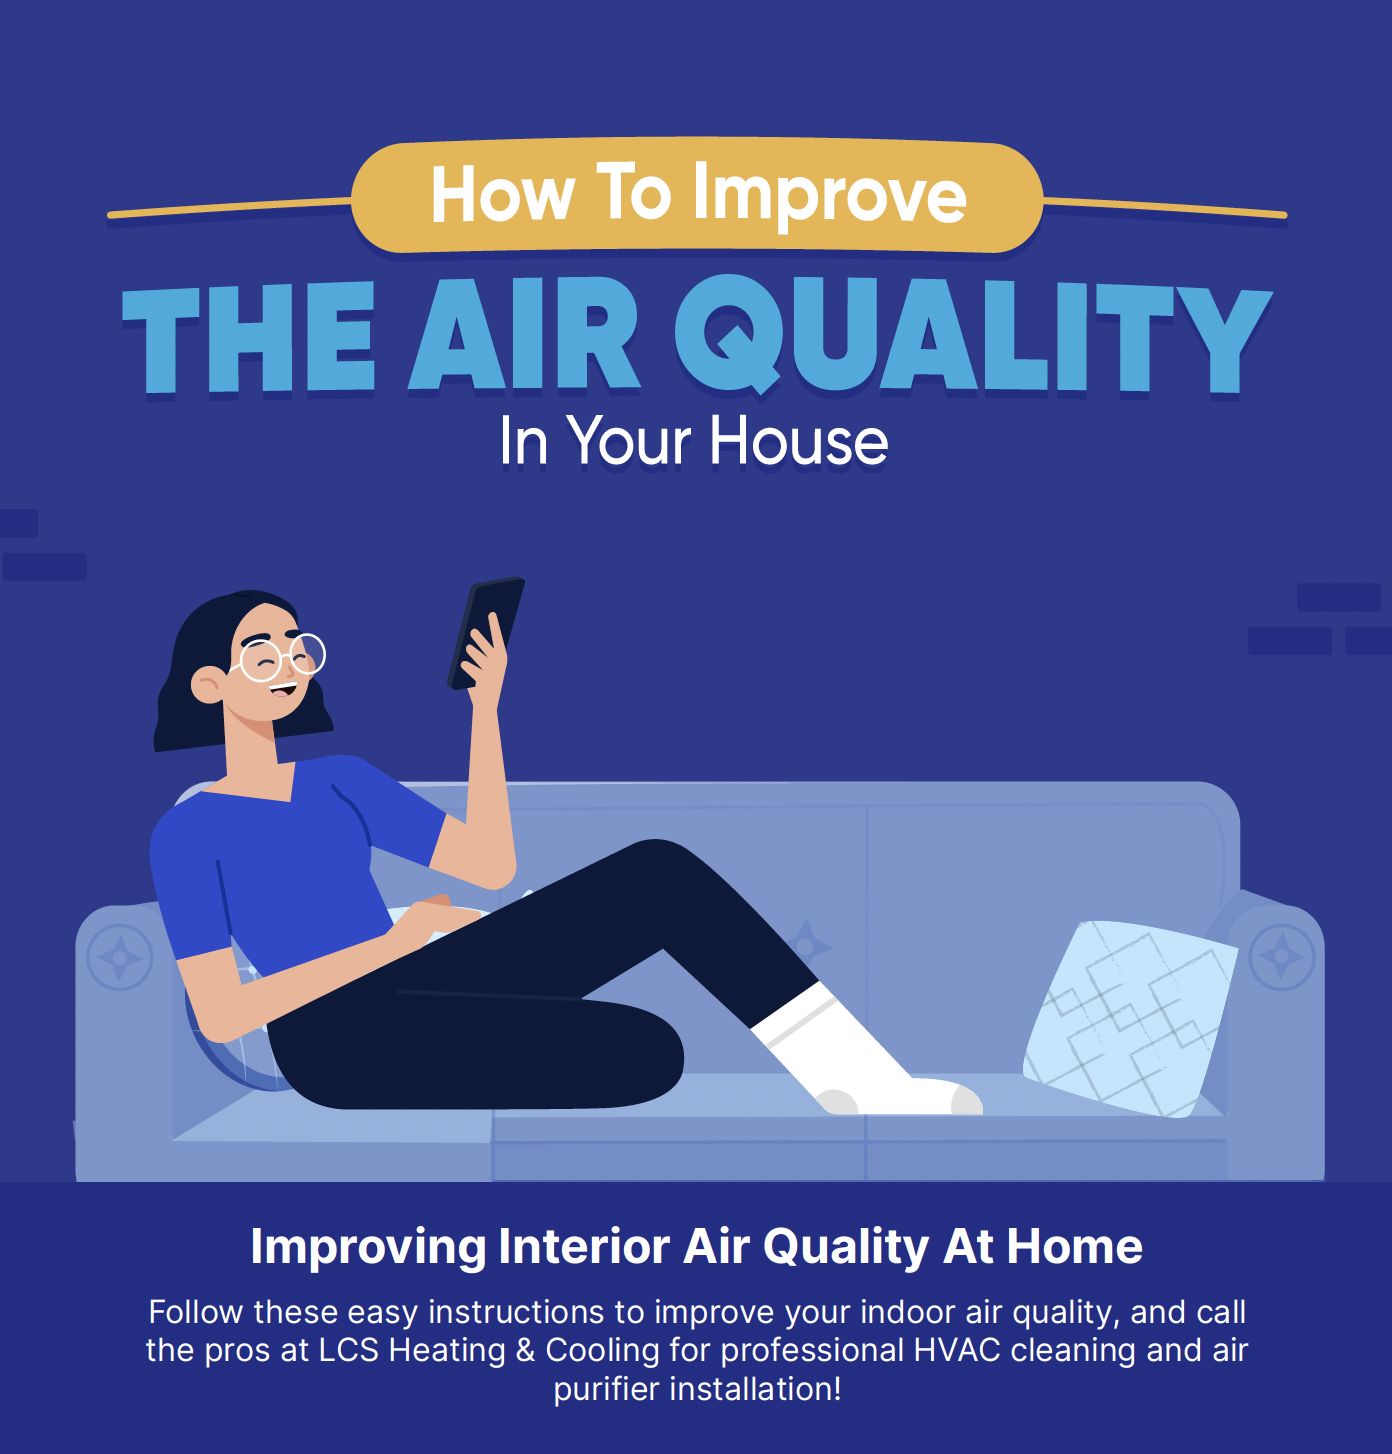 How To Improve The Air Quality In Your House